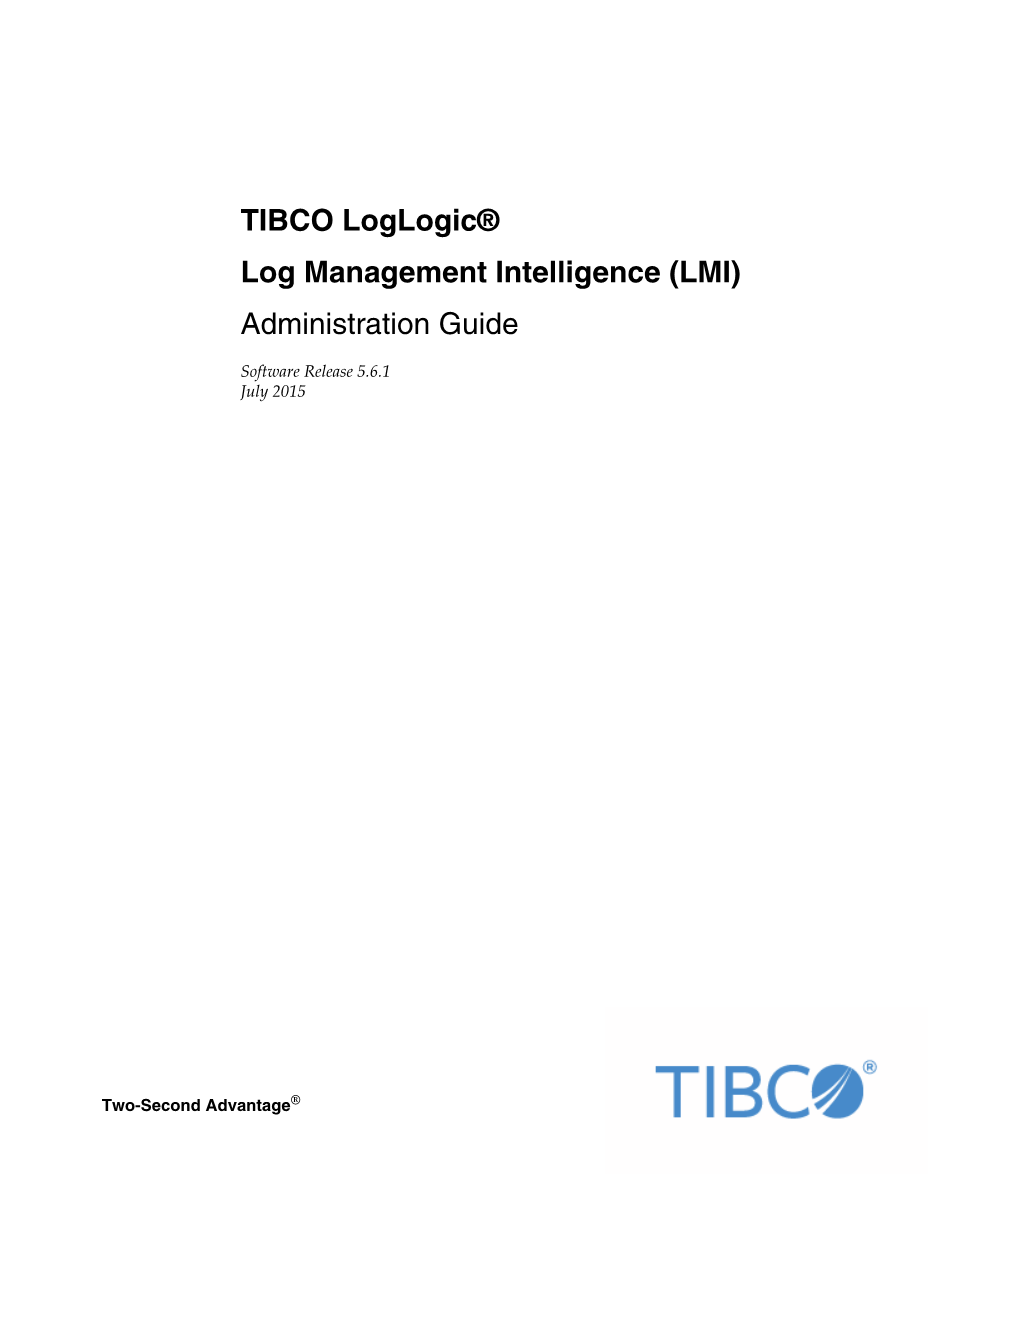 Loglogic Administration Guide Is a Management Guide for the Loglogic Appliances